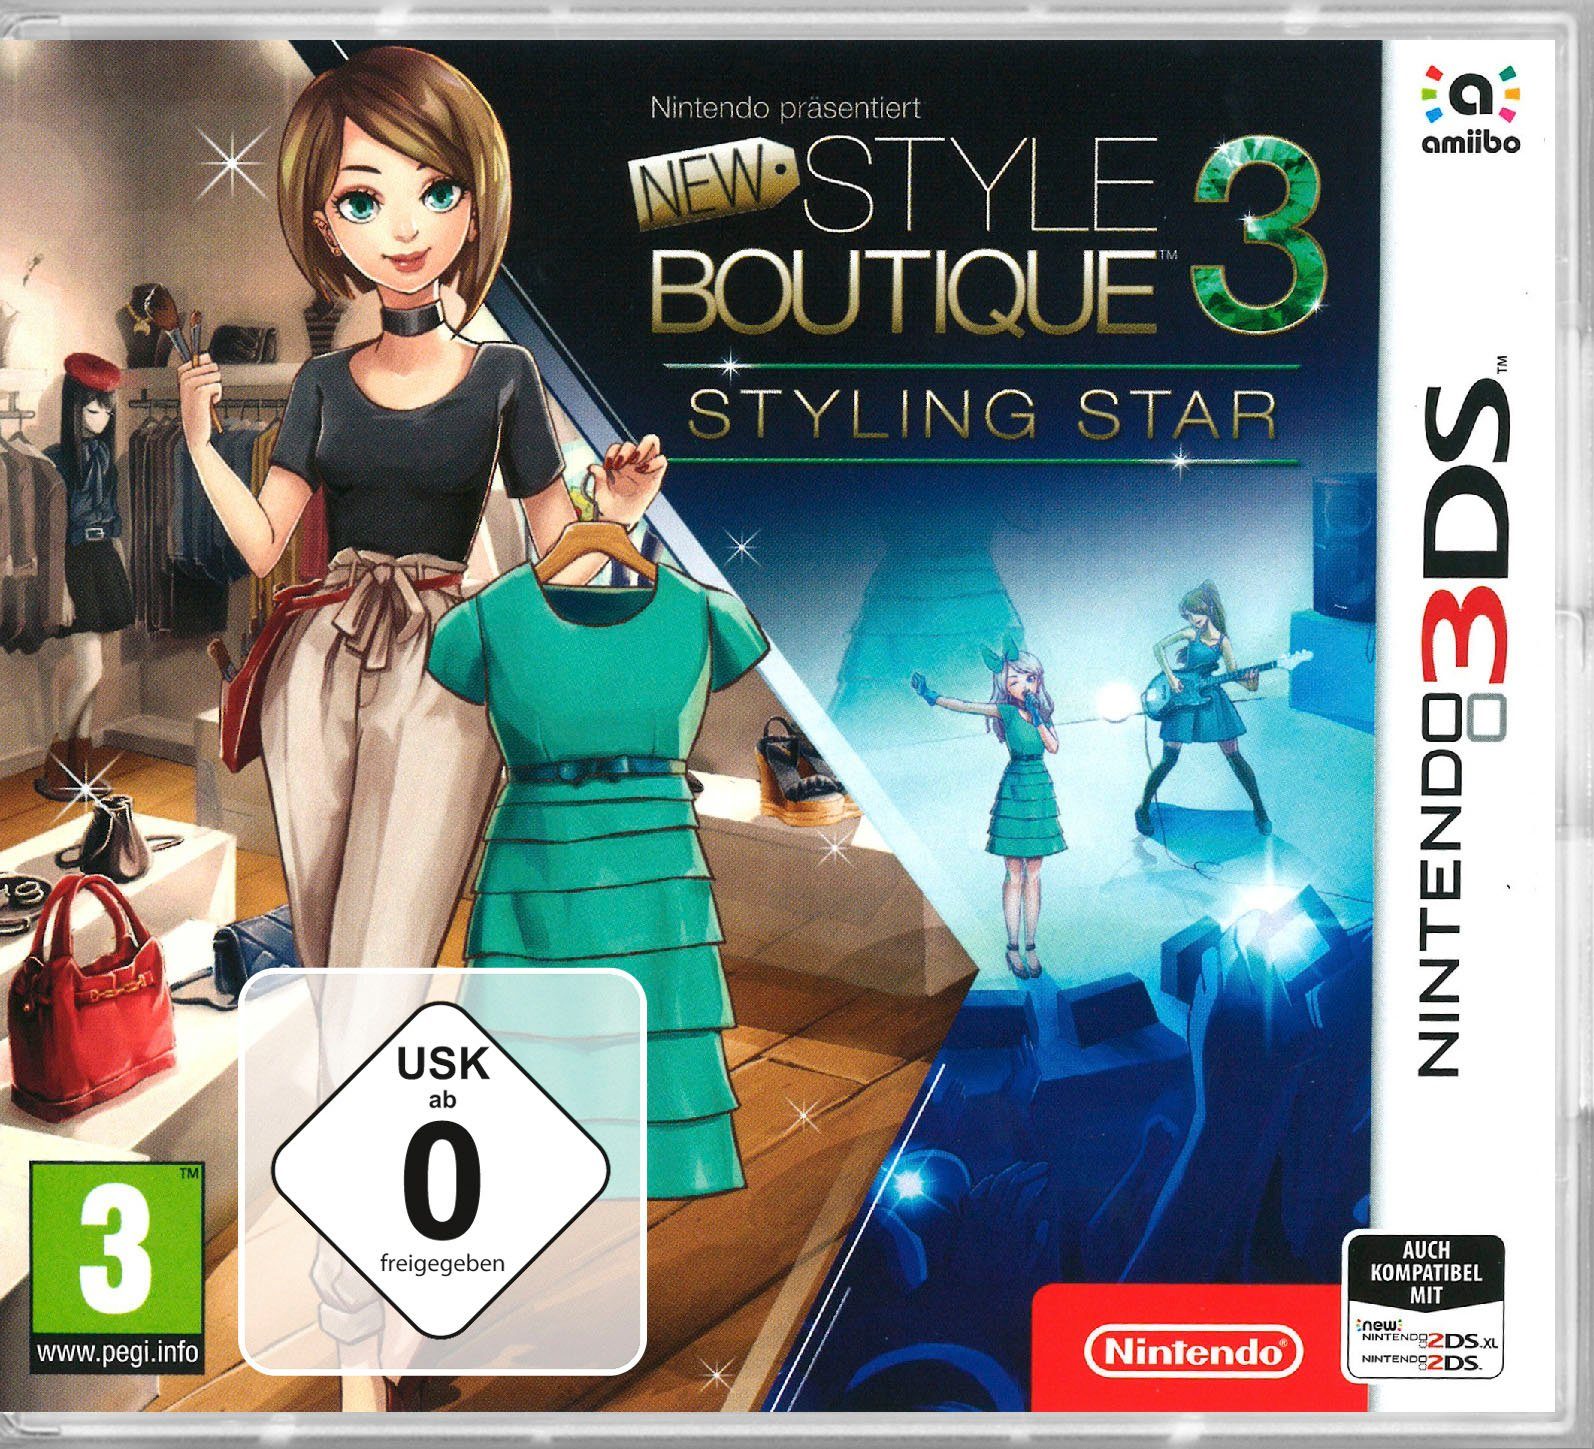 New Style Boutique 3 - Styling Star Nintendo 3DS | OTTO